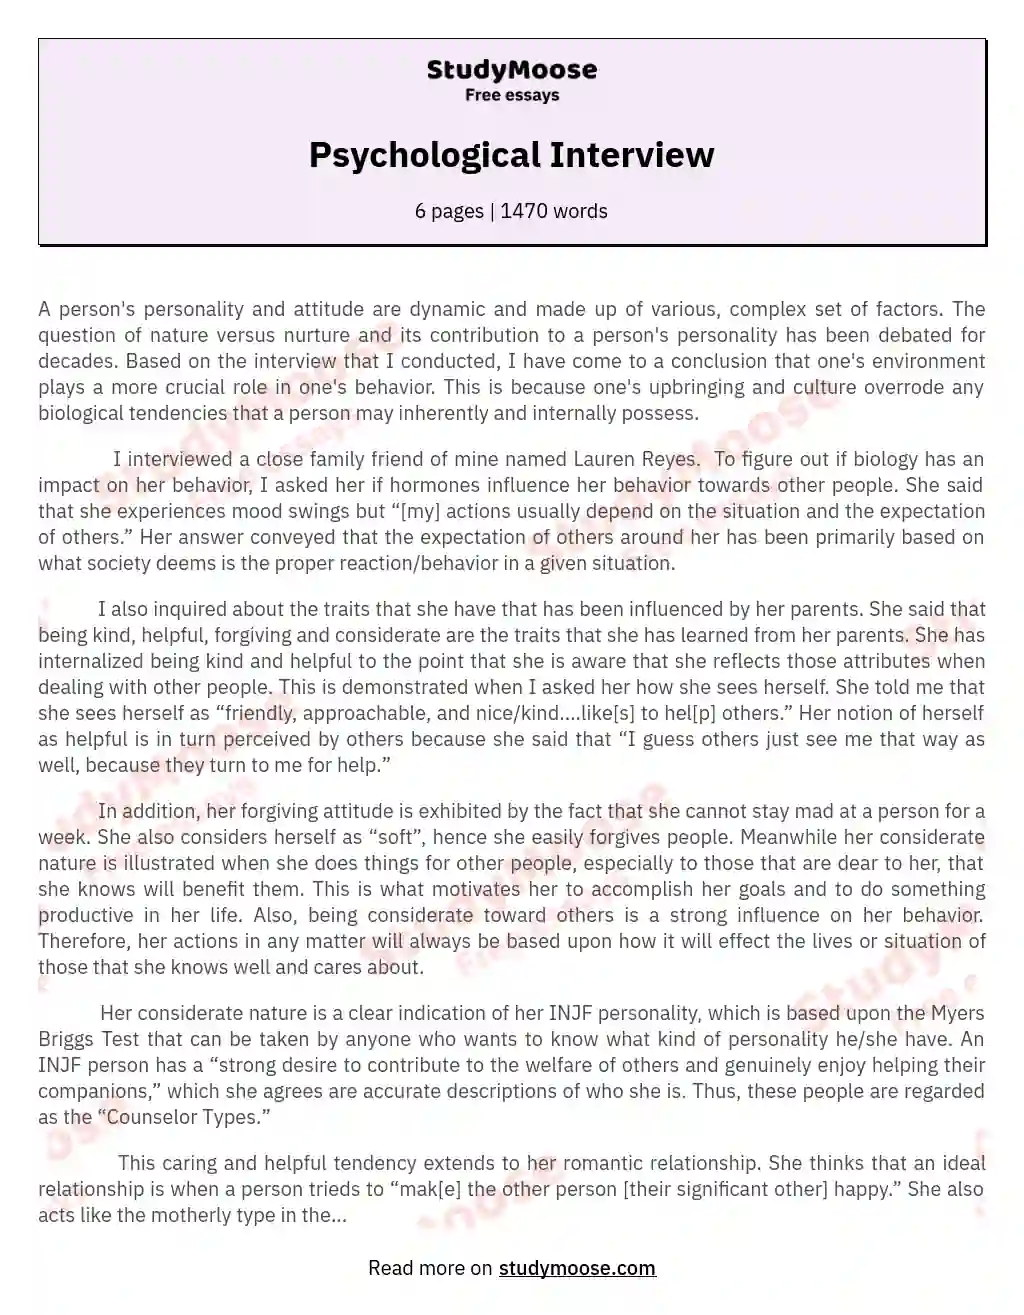 example of psychological research paper